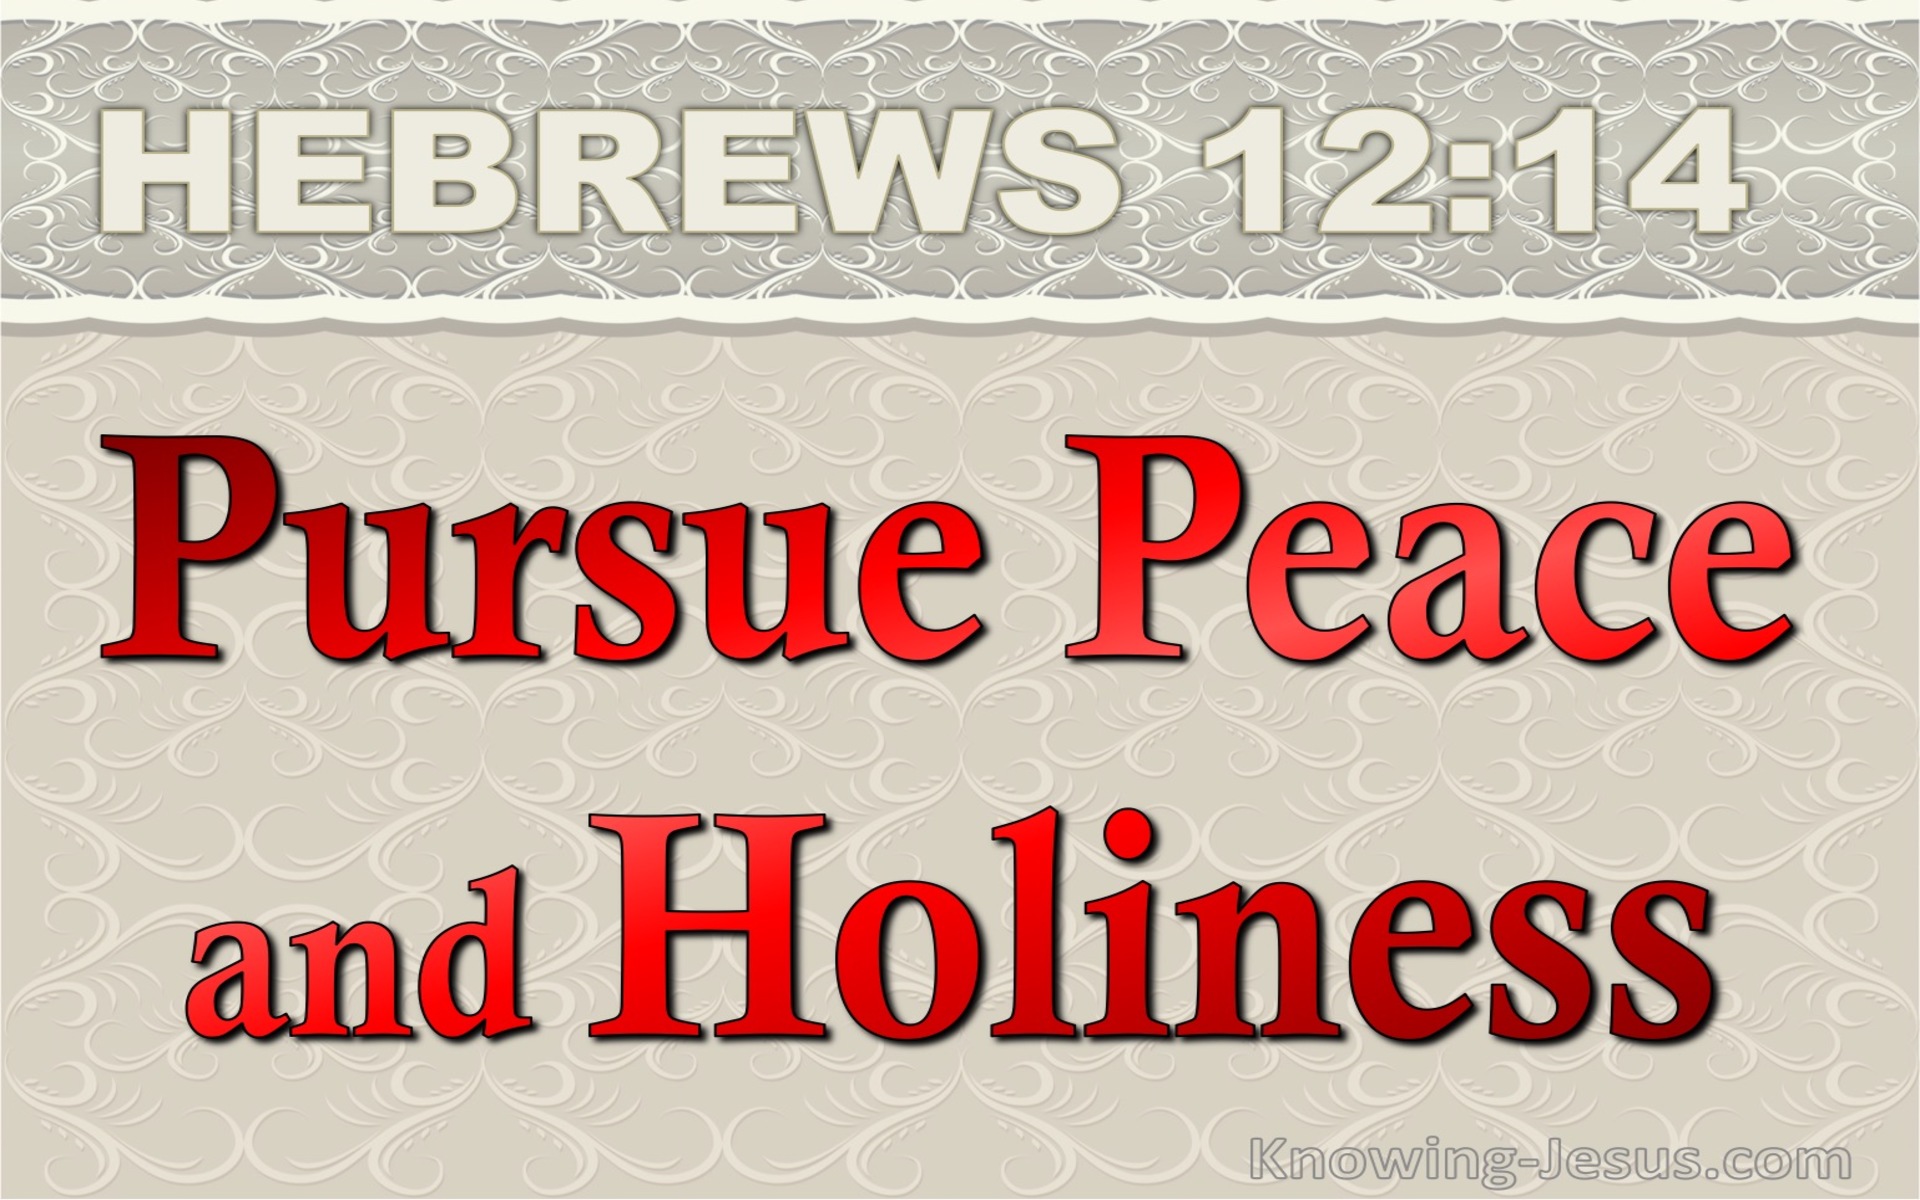 Hebrews 12:14 Pursue Peace And Holiness (red)